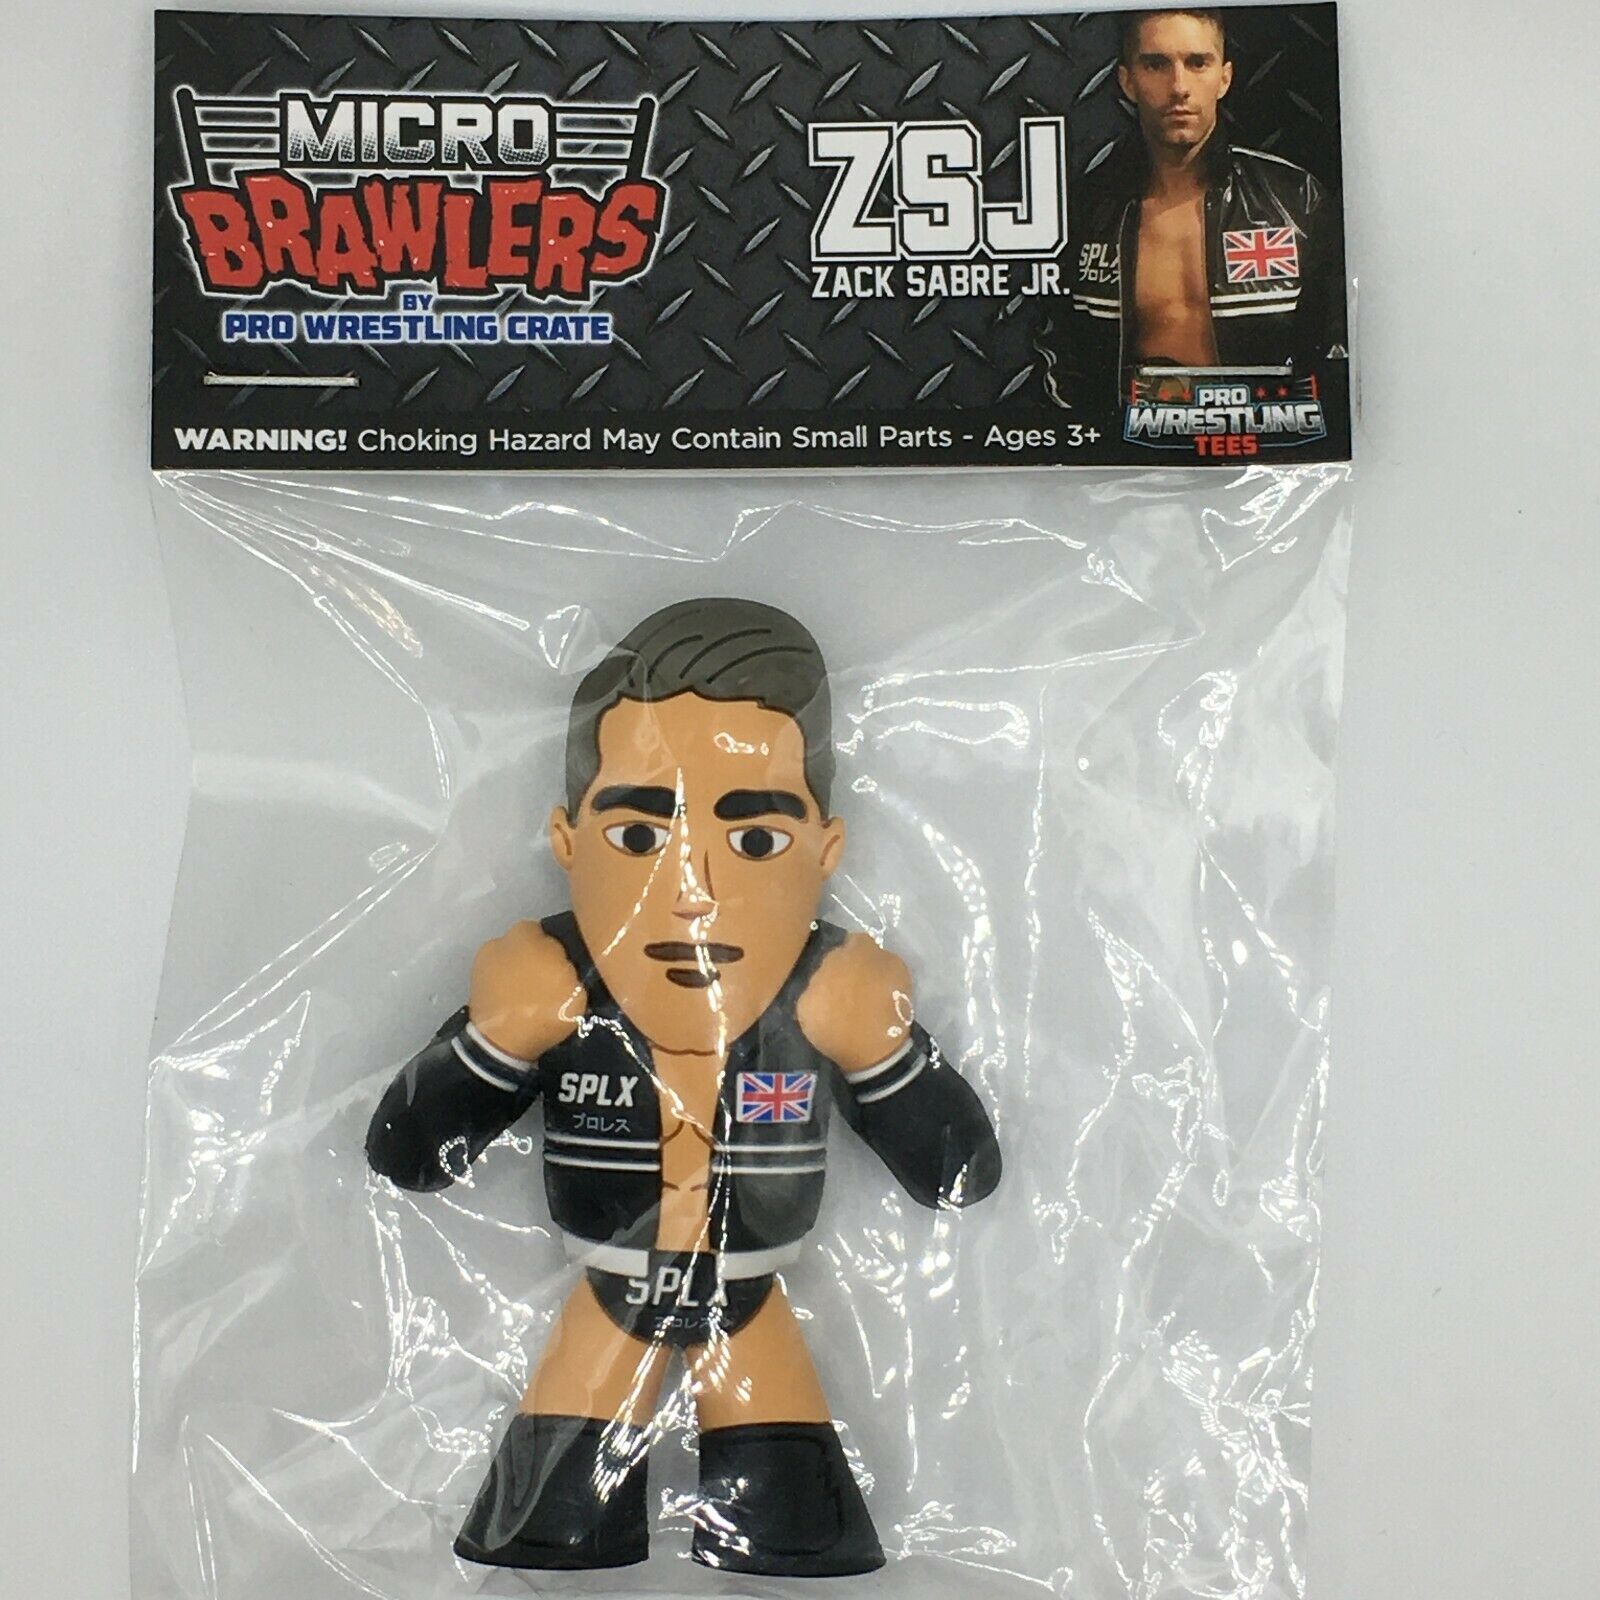 2018 Pro Wrestling Tees Crate Exclusive Micro Brawlers Zack Sabre